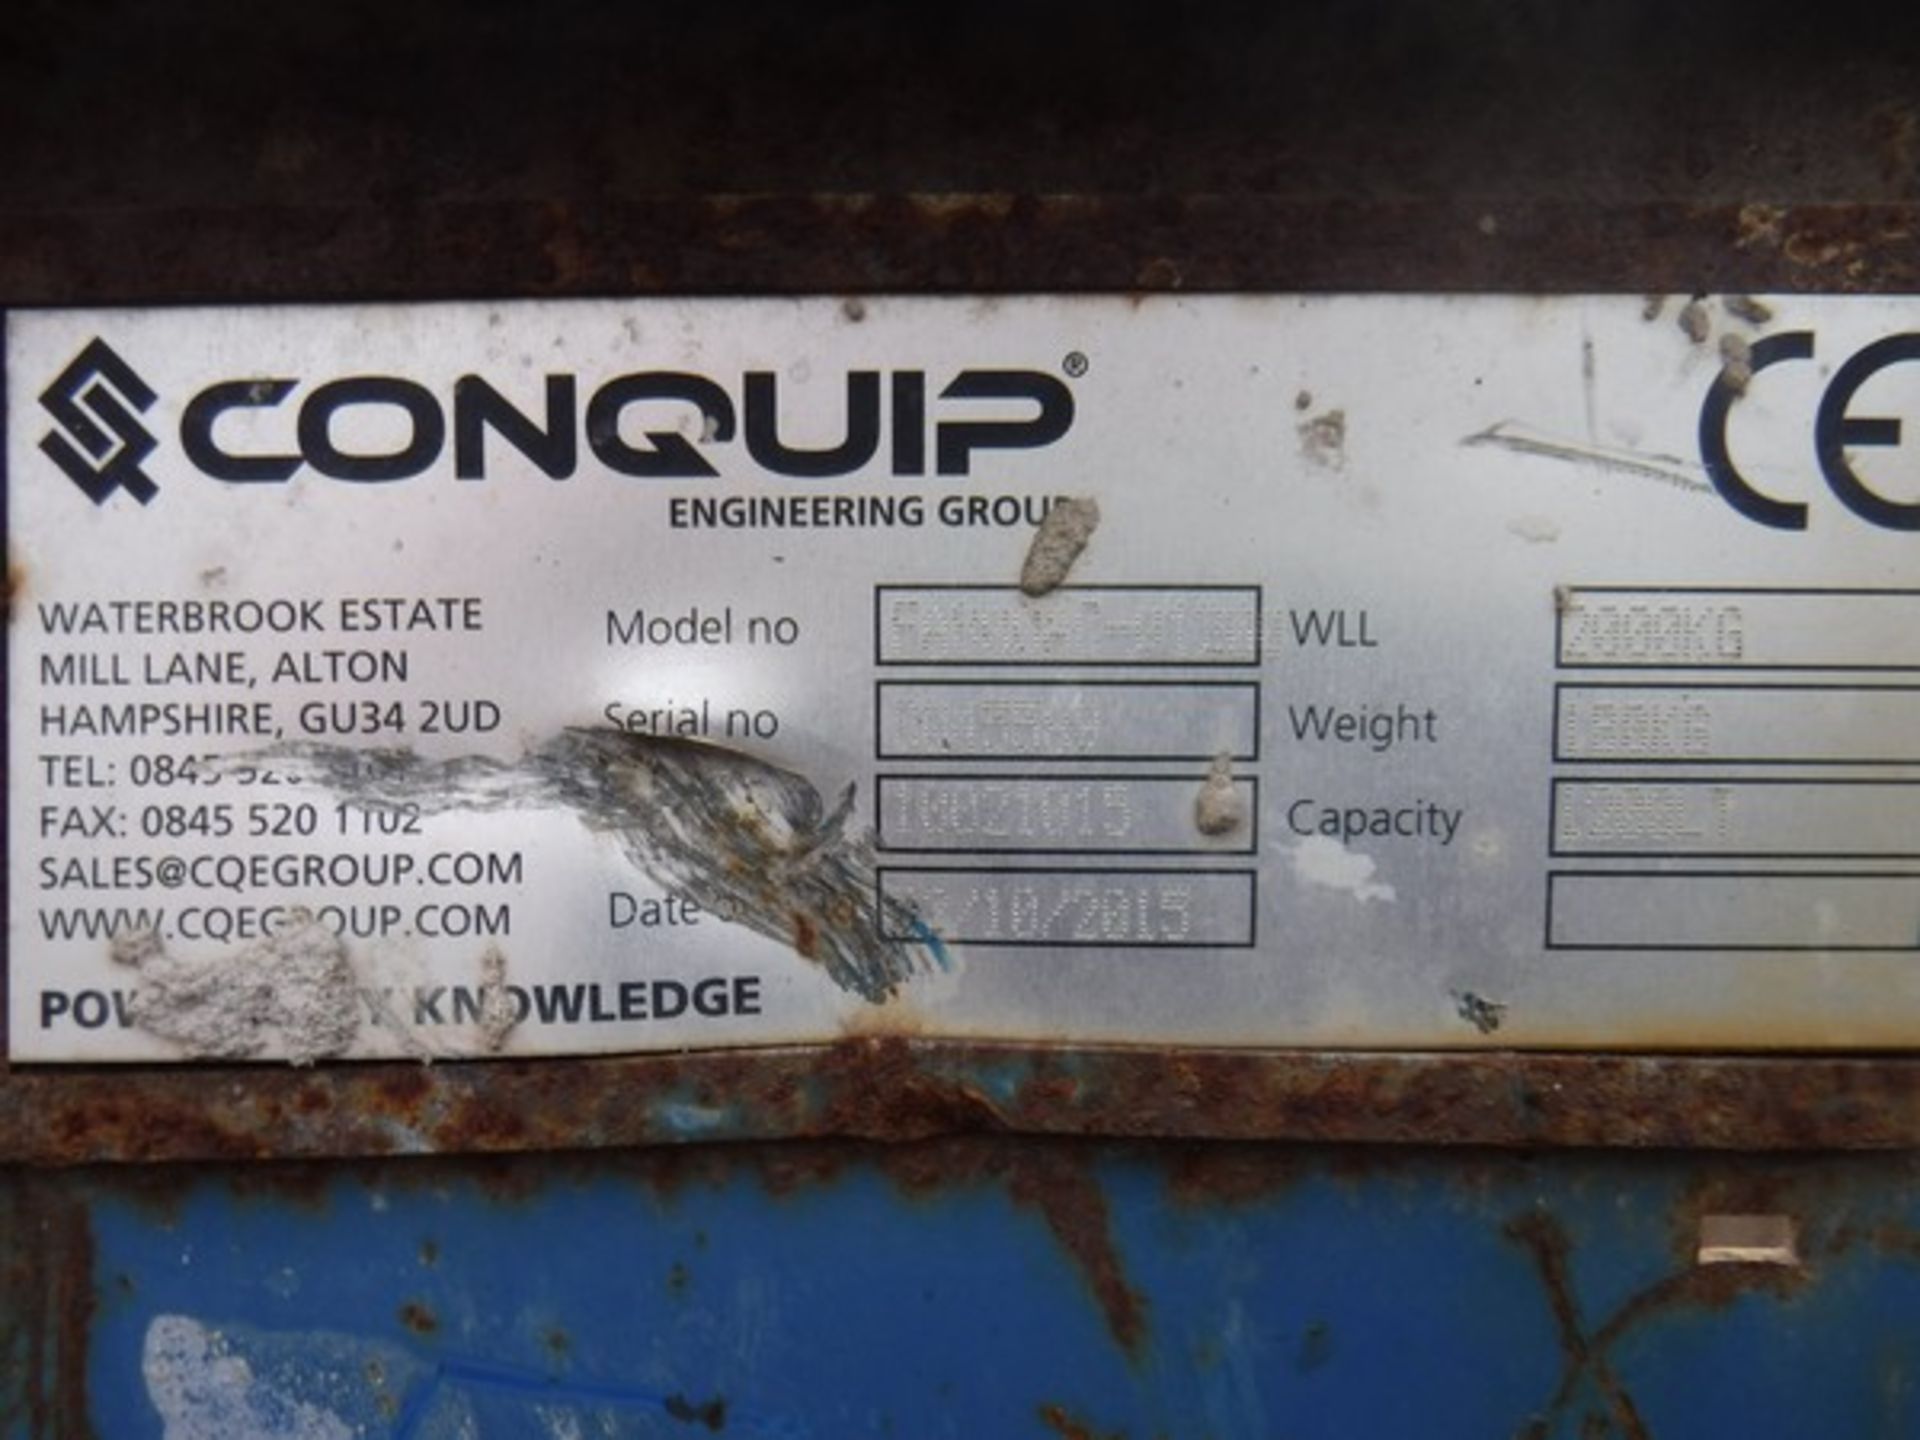 2015 CONQUIP 1200ltr tipping skips x 2 S/N CQ45589 & CQ47577 - Image 5 of 6